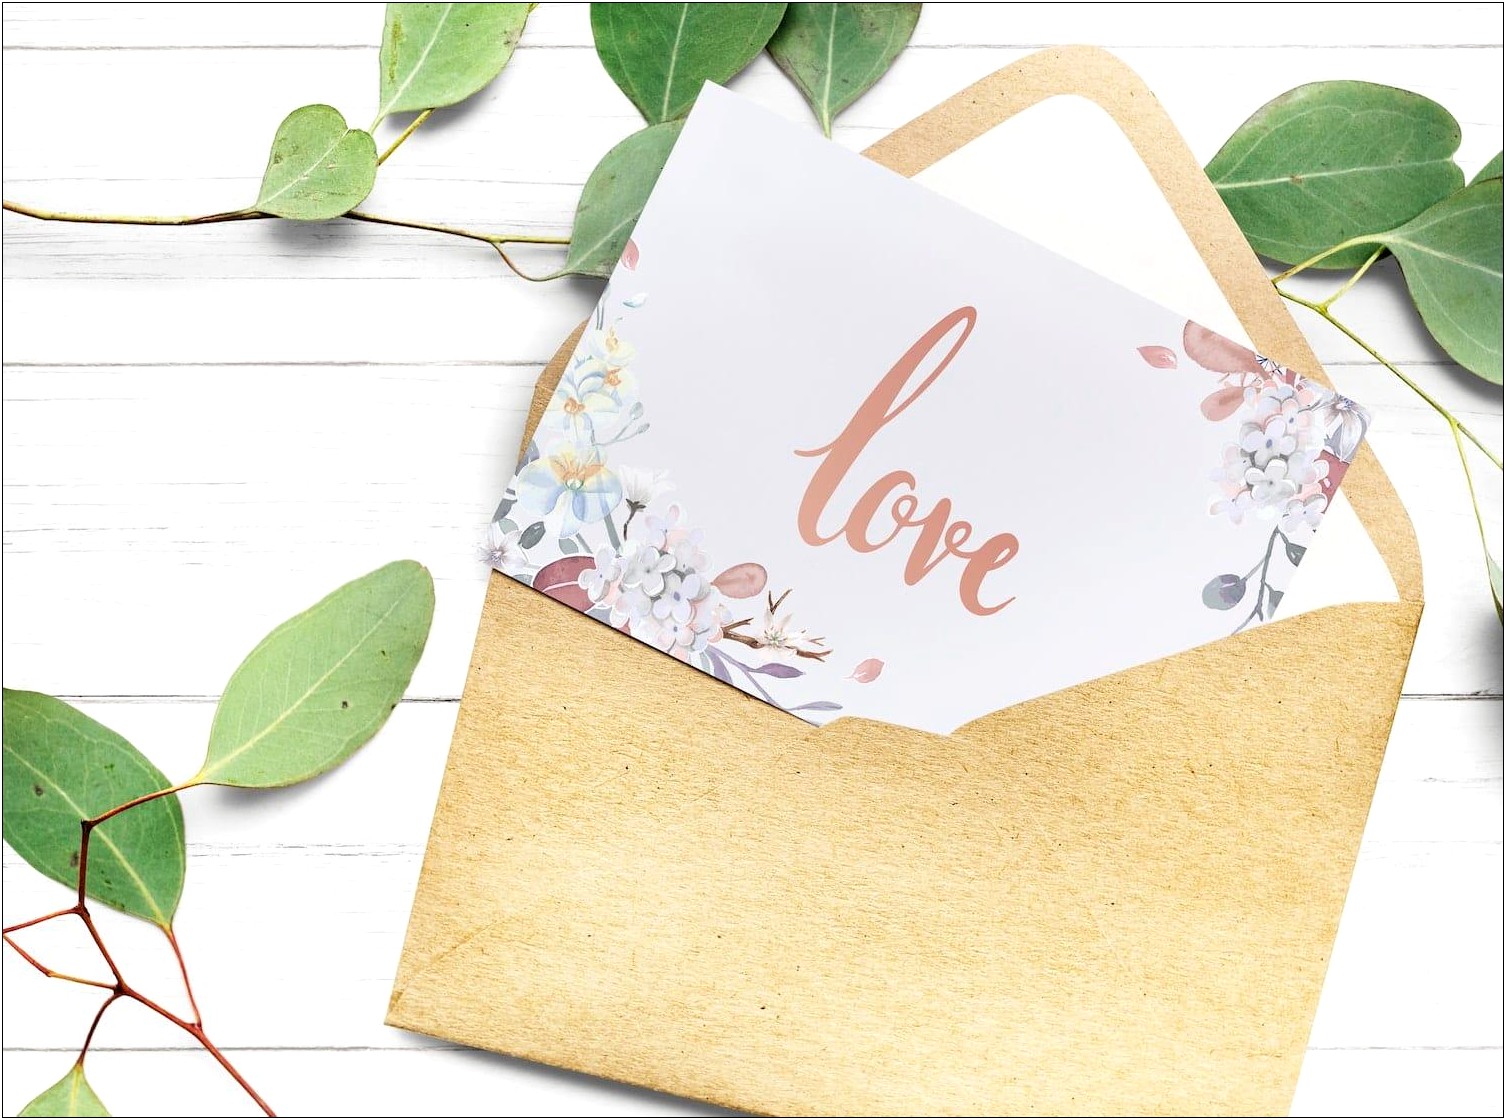 Best Paper For Printing Wedding Invitations At Home